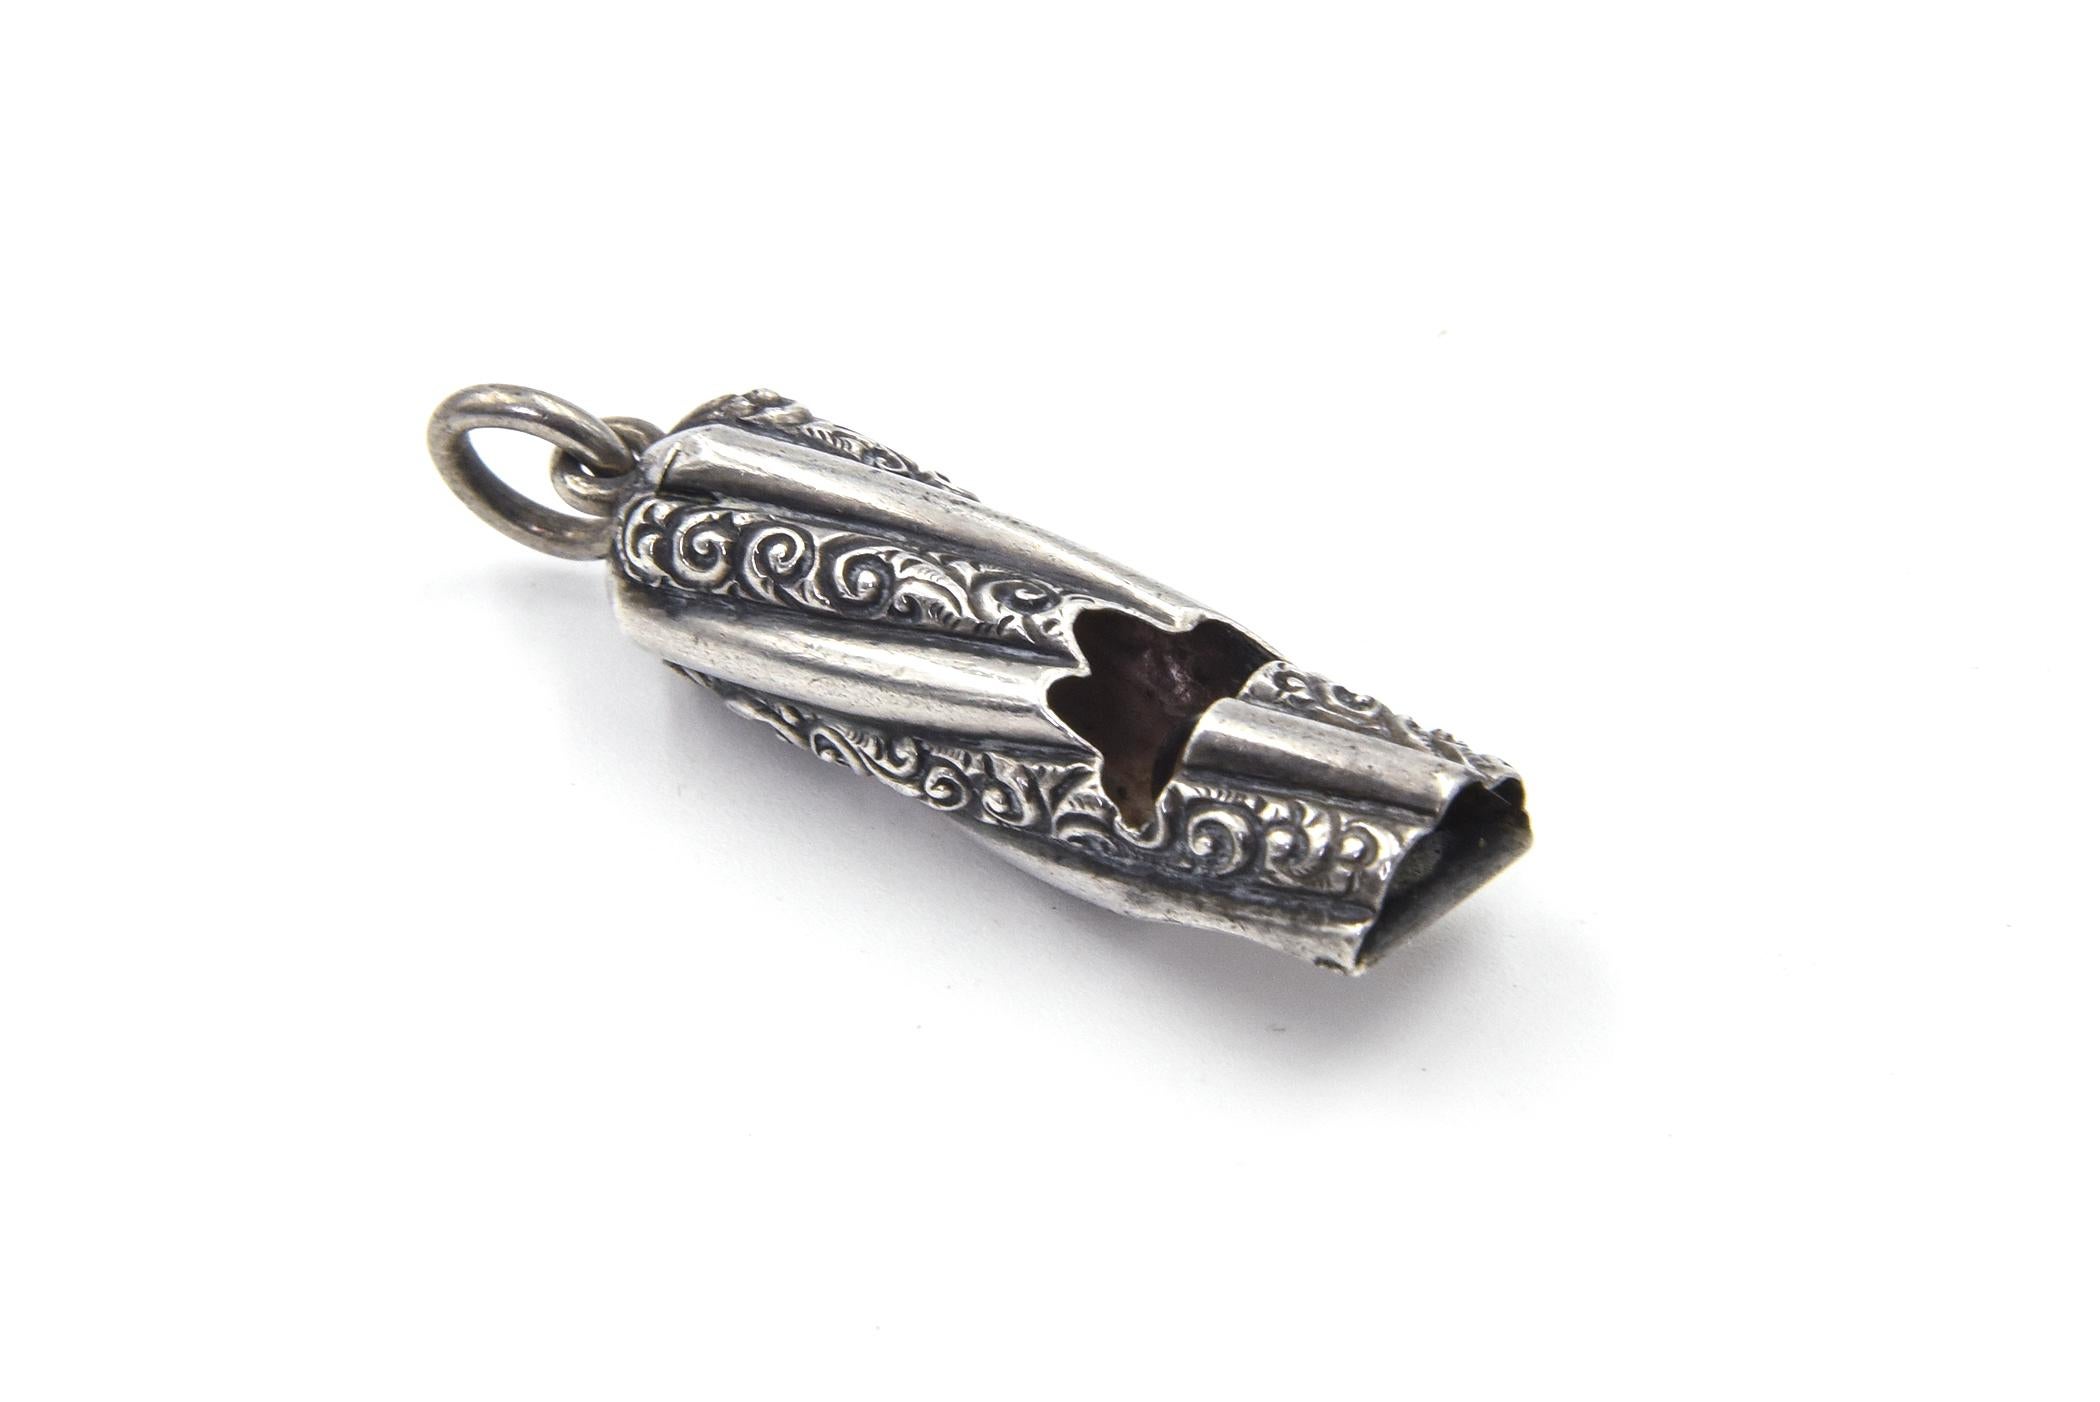 Working delightful sterling silver antique Victorian whistle featuring an engraved and fluted design.  The whistle works.  This piece would be perfect for a necklace, chatelain or even a charm bracelet.
Marked Sterling
Measurement below with bale